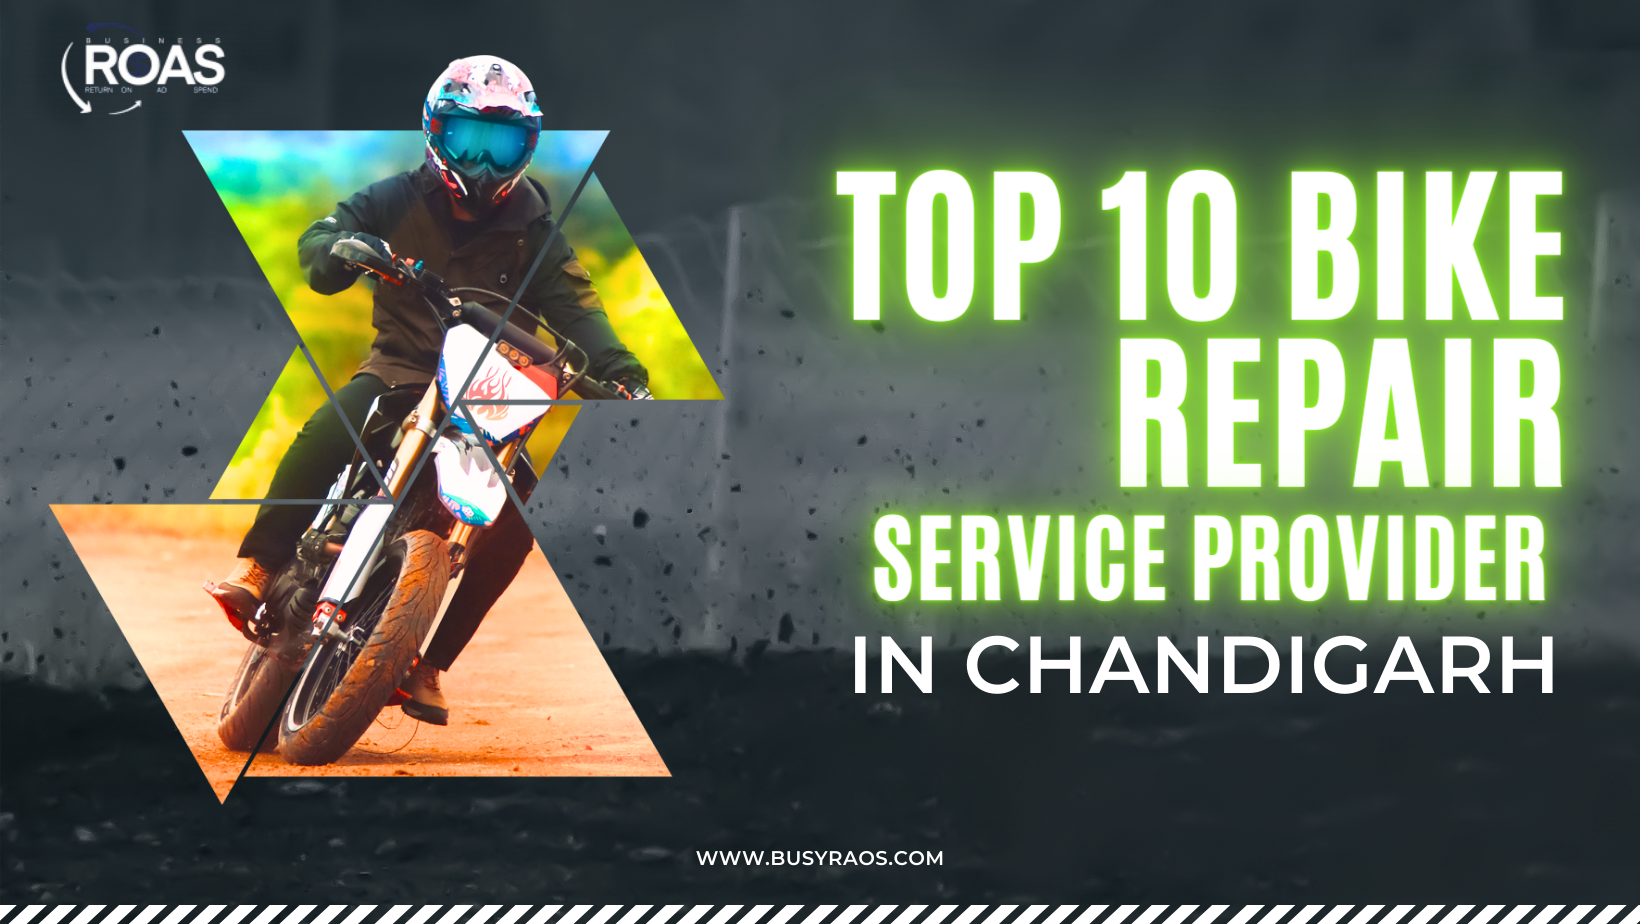 TOp 10 bike repair service provider and services in chandigarh